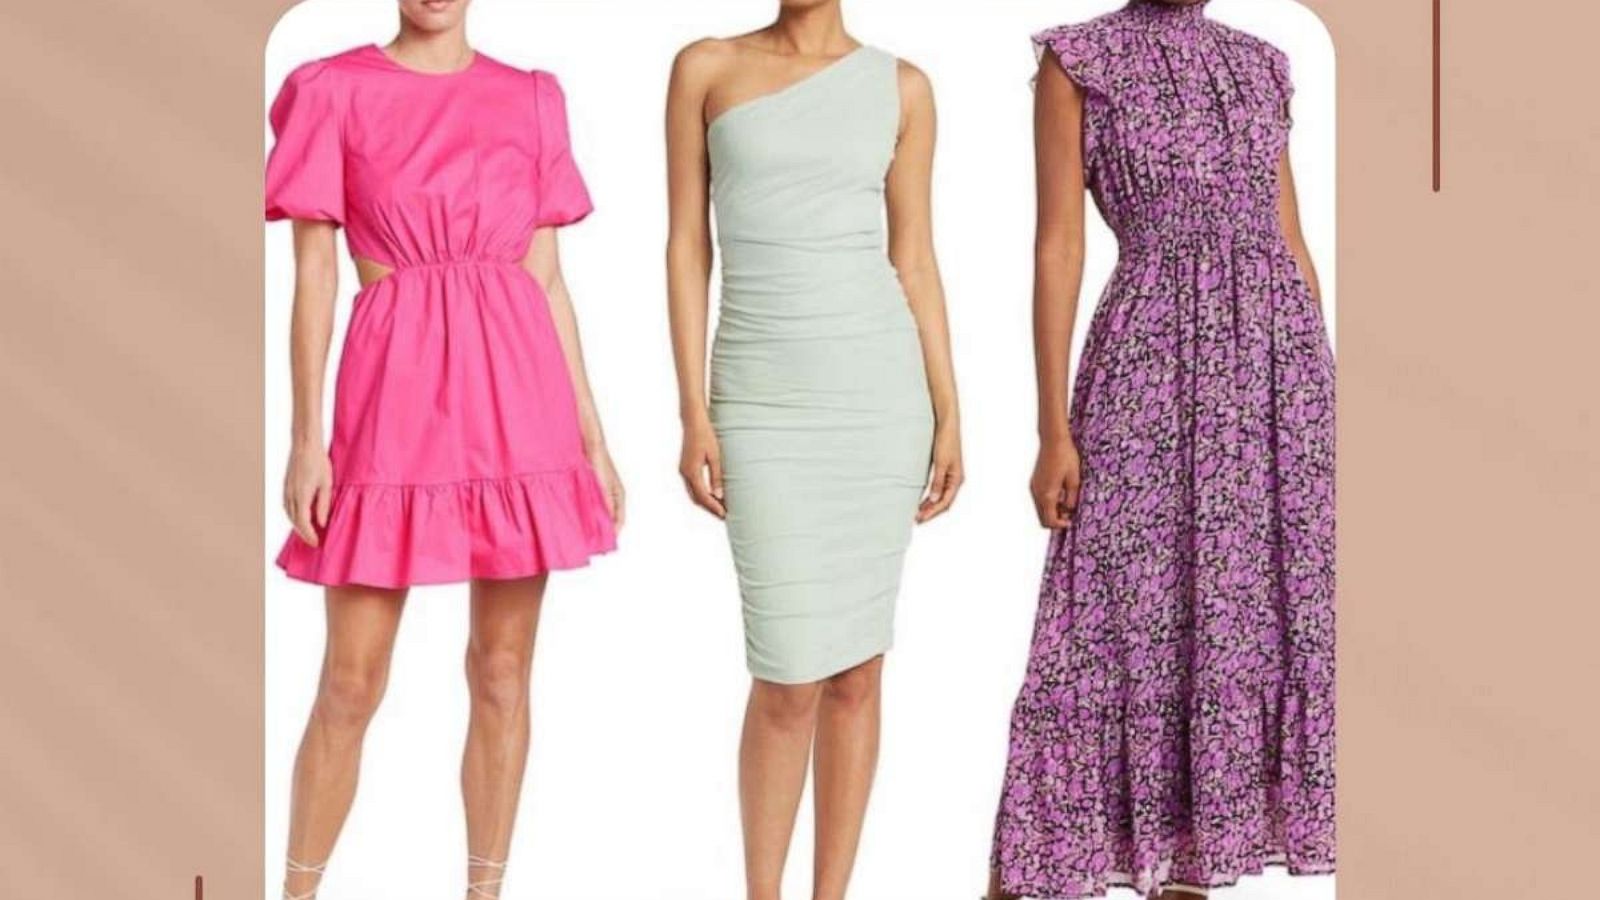 Nordstrom Rack: Save up to 65% on wedding guest styles